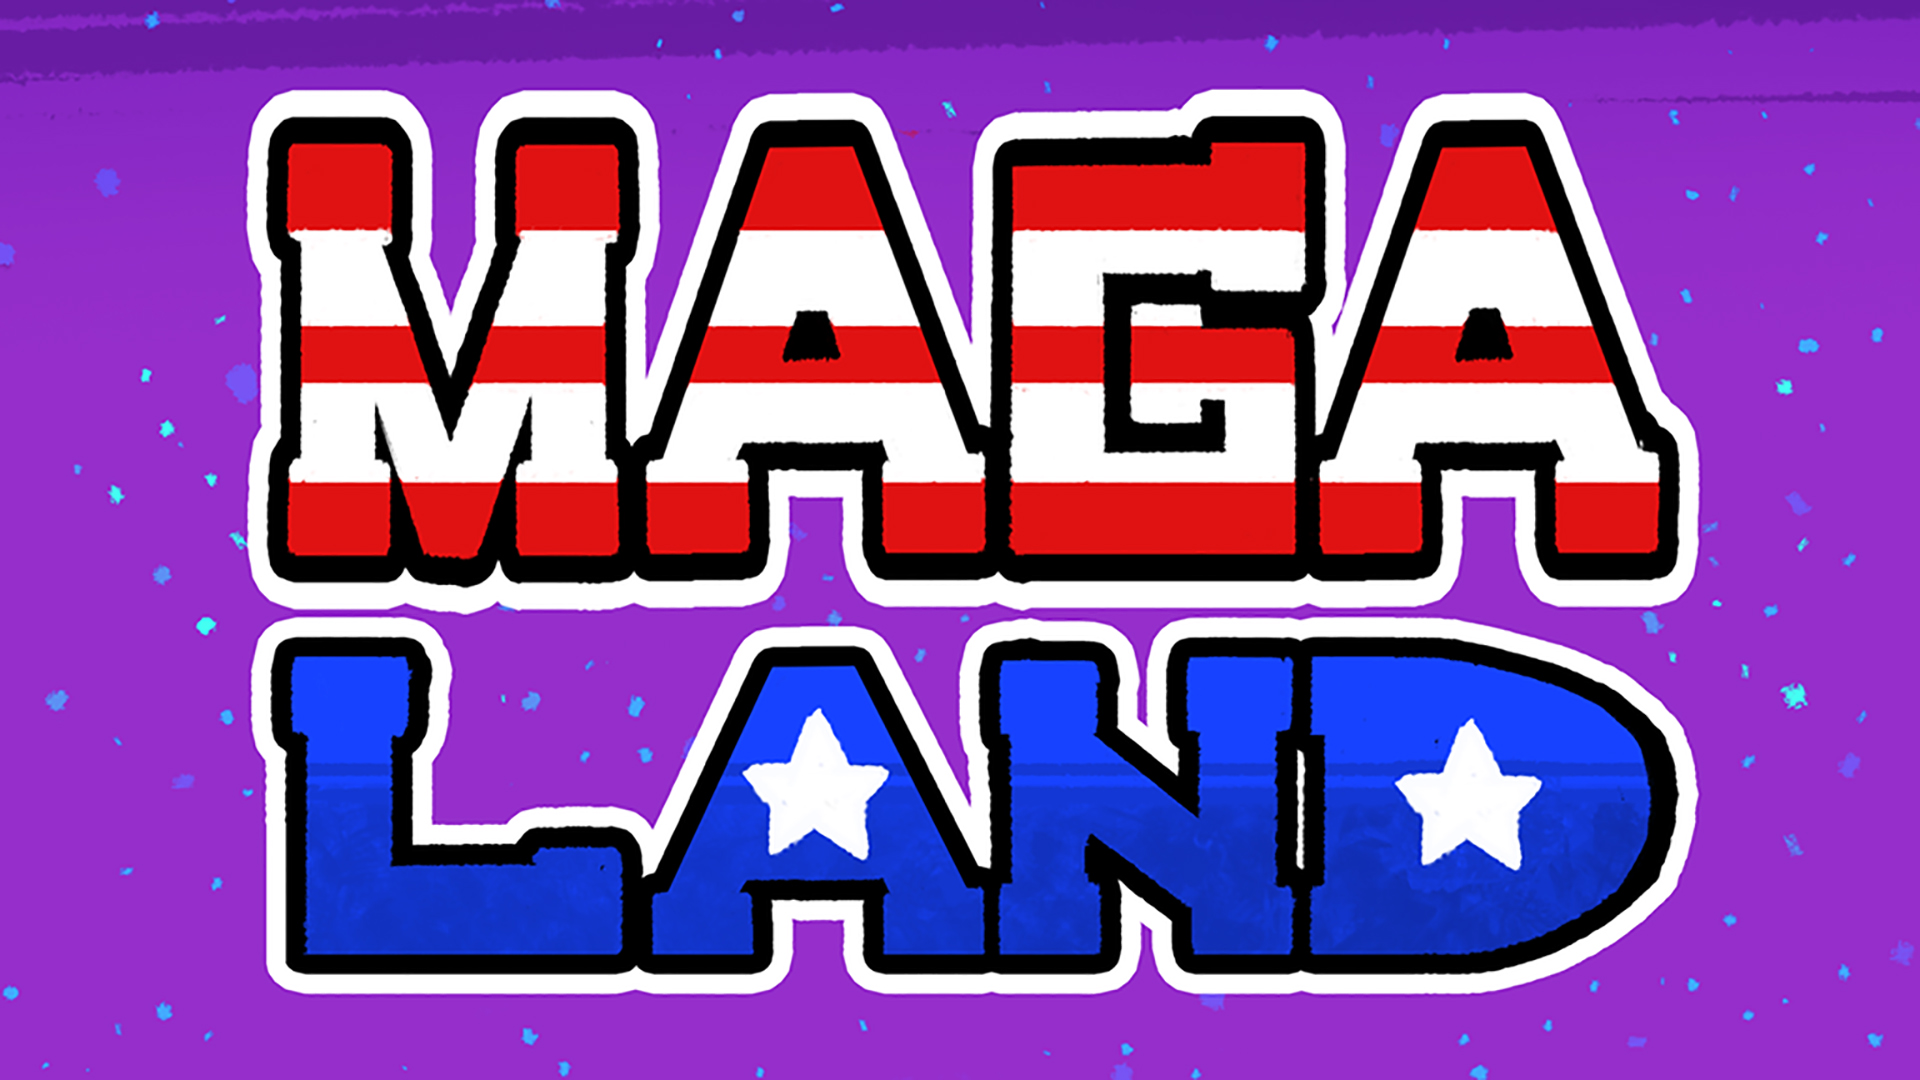 Maga Land Game Currently in Development with Retro Bit Shift